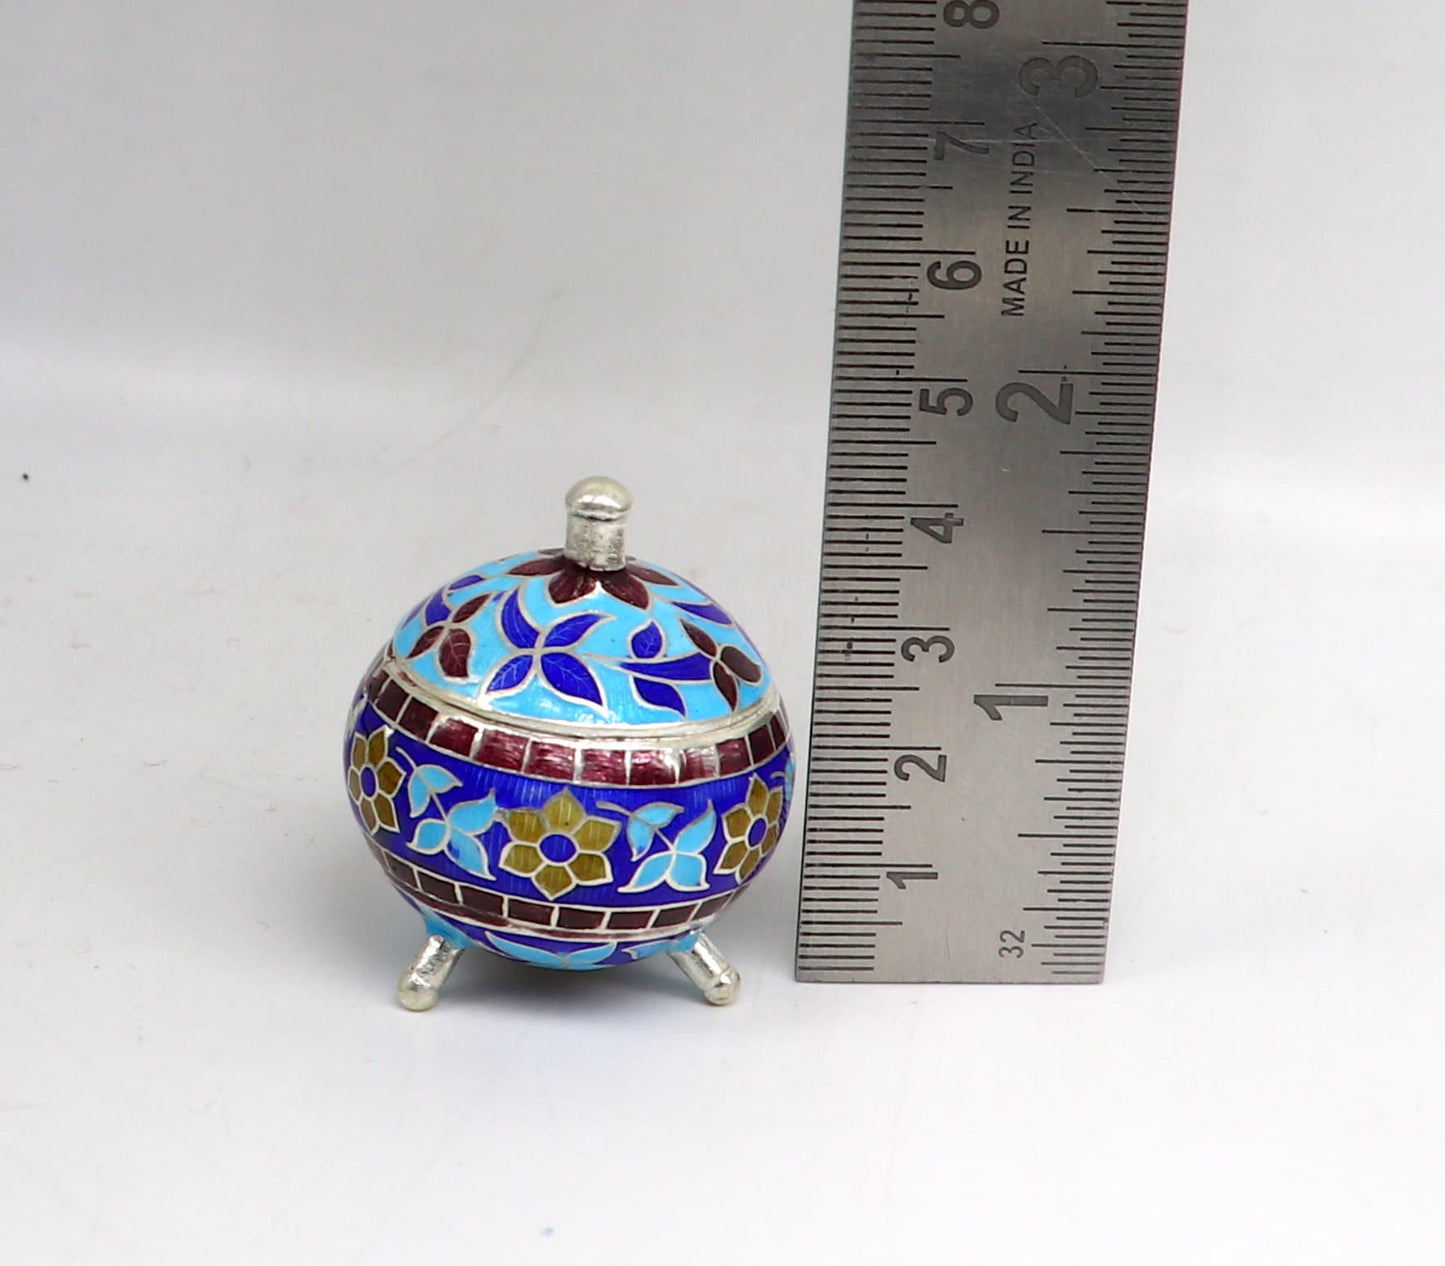 925 Sterling silver handmade fabulous trinket box, solid container box, casket box, sindoor box, enamel work customized gifting box stb145 - TRIBAL ORNAMENTS